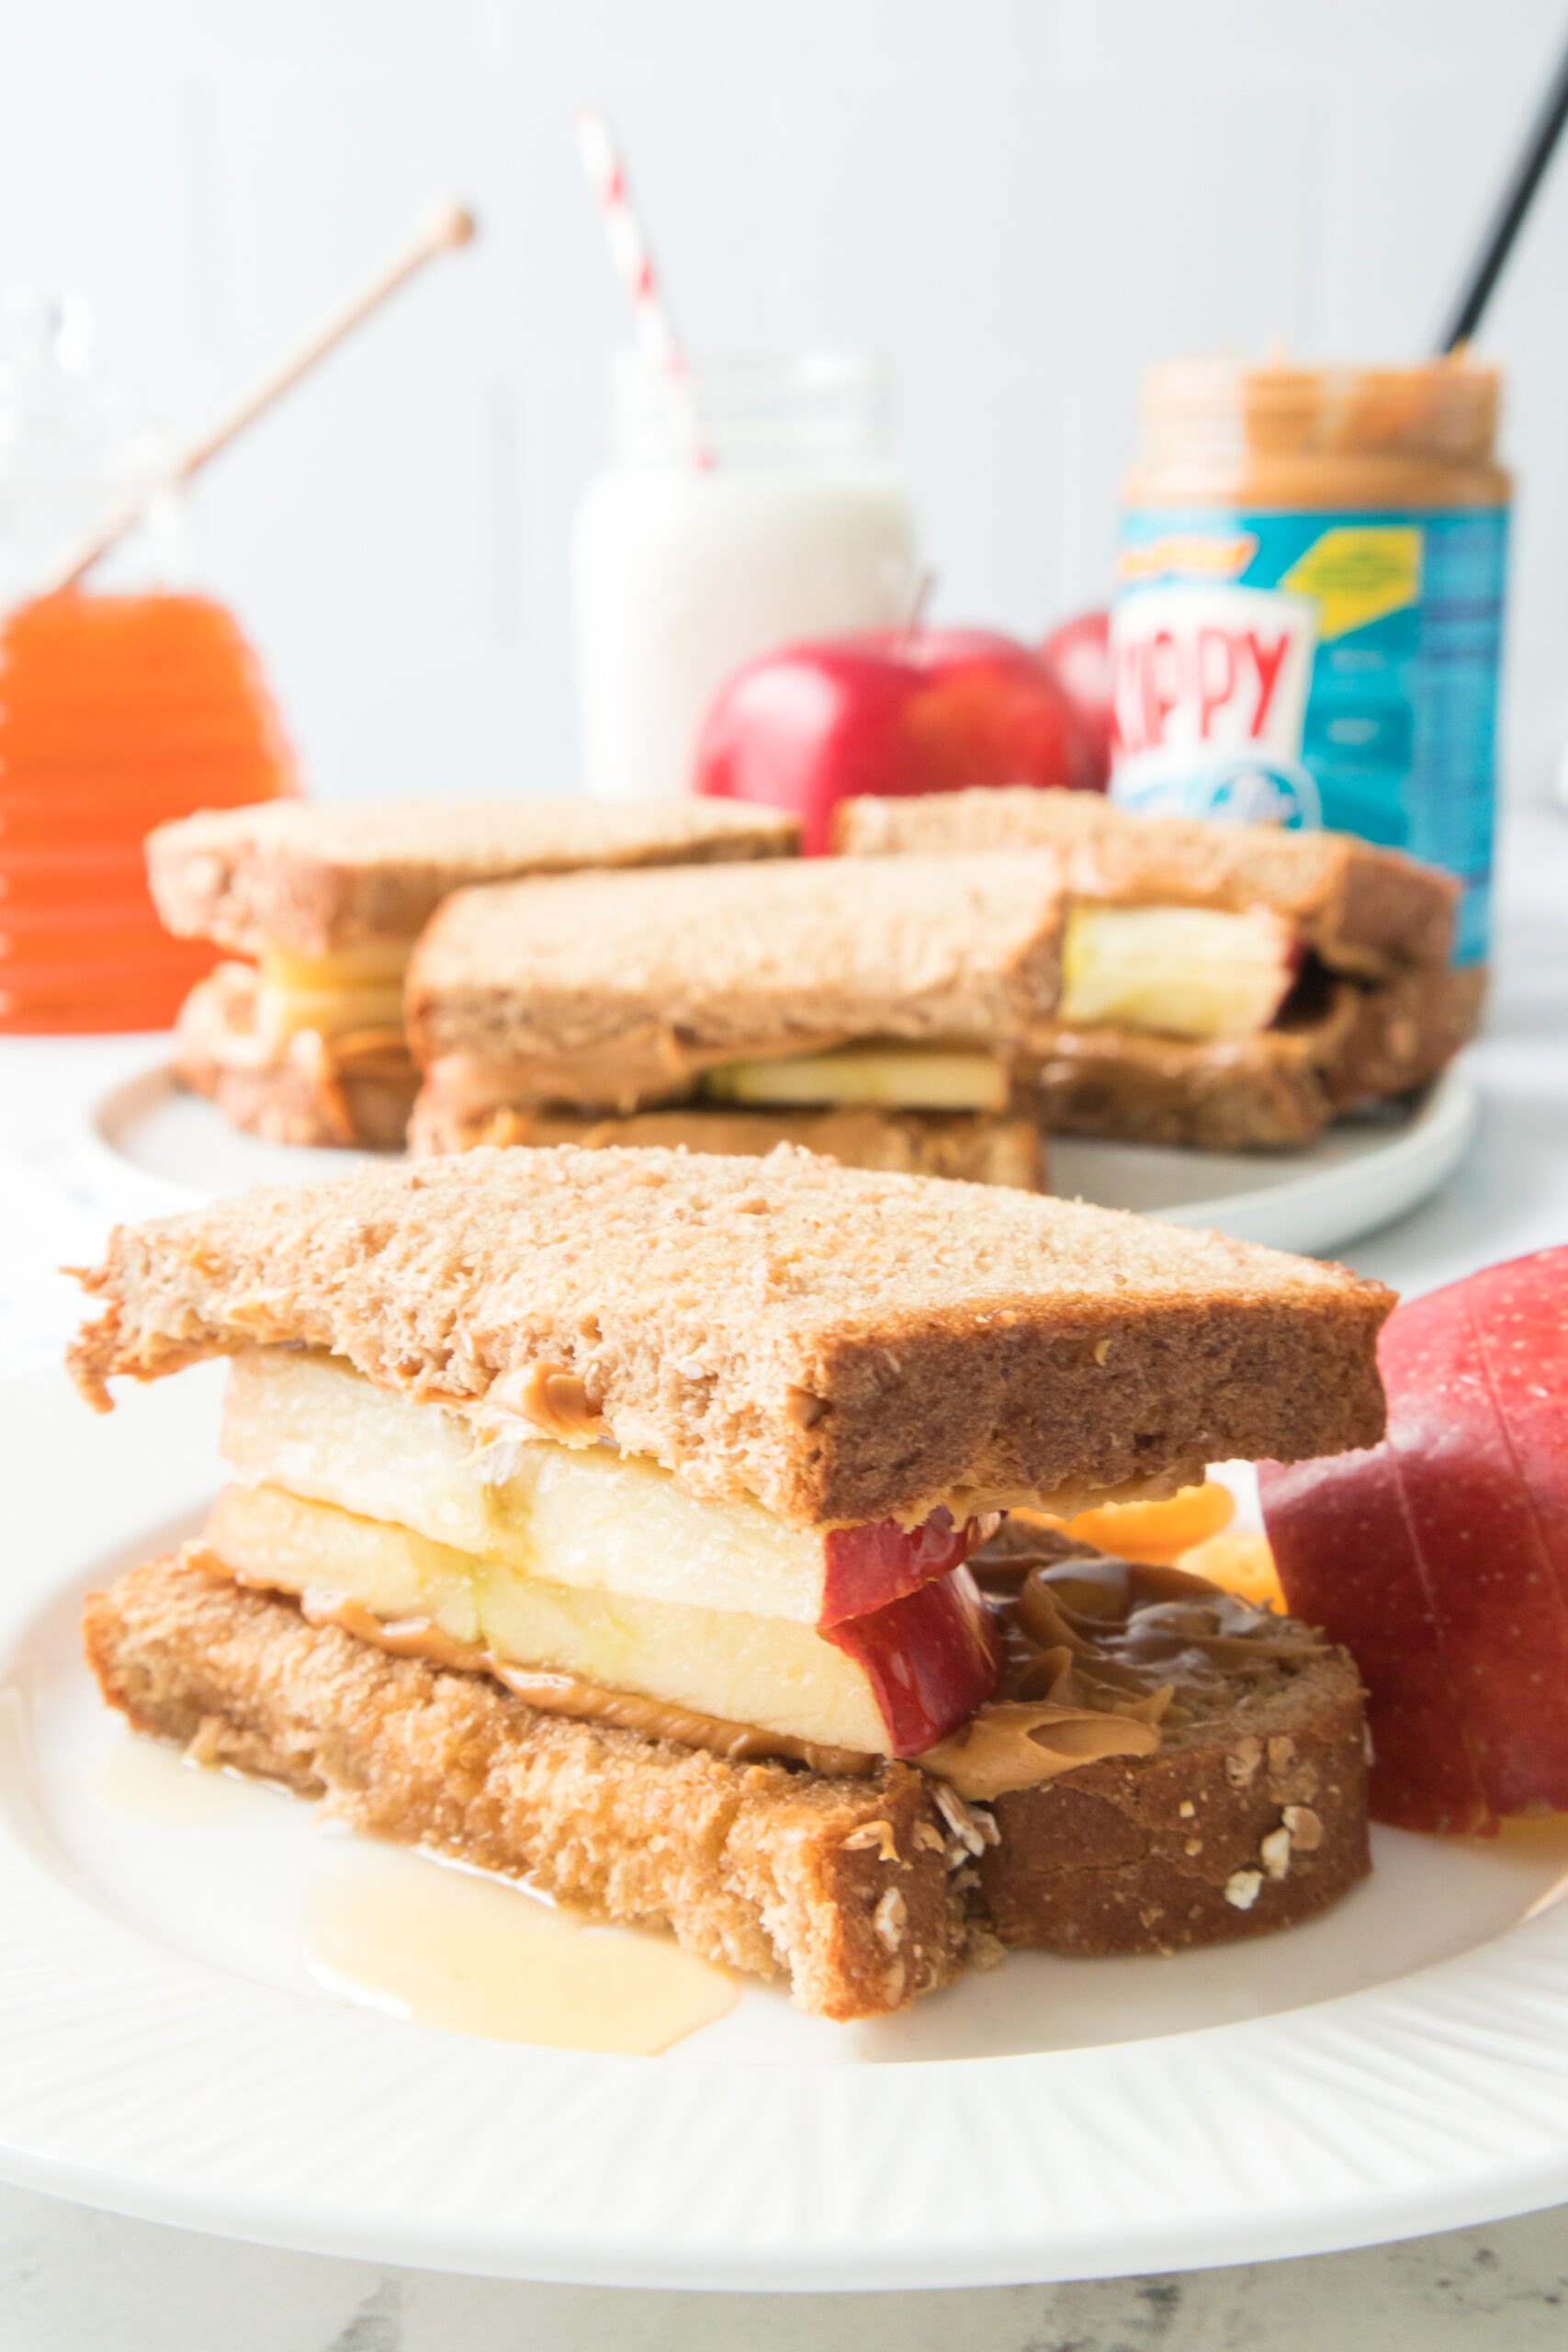 Apple, Peanut Butter and Honey Sandwich - The Produce Moms